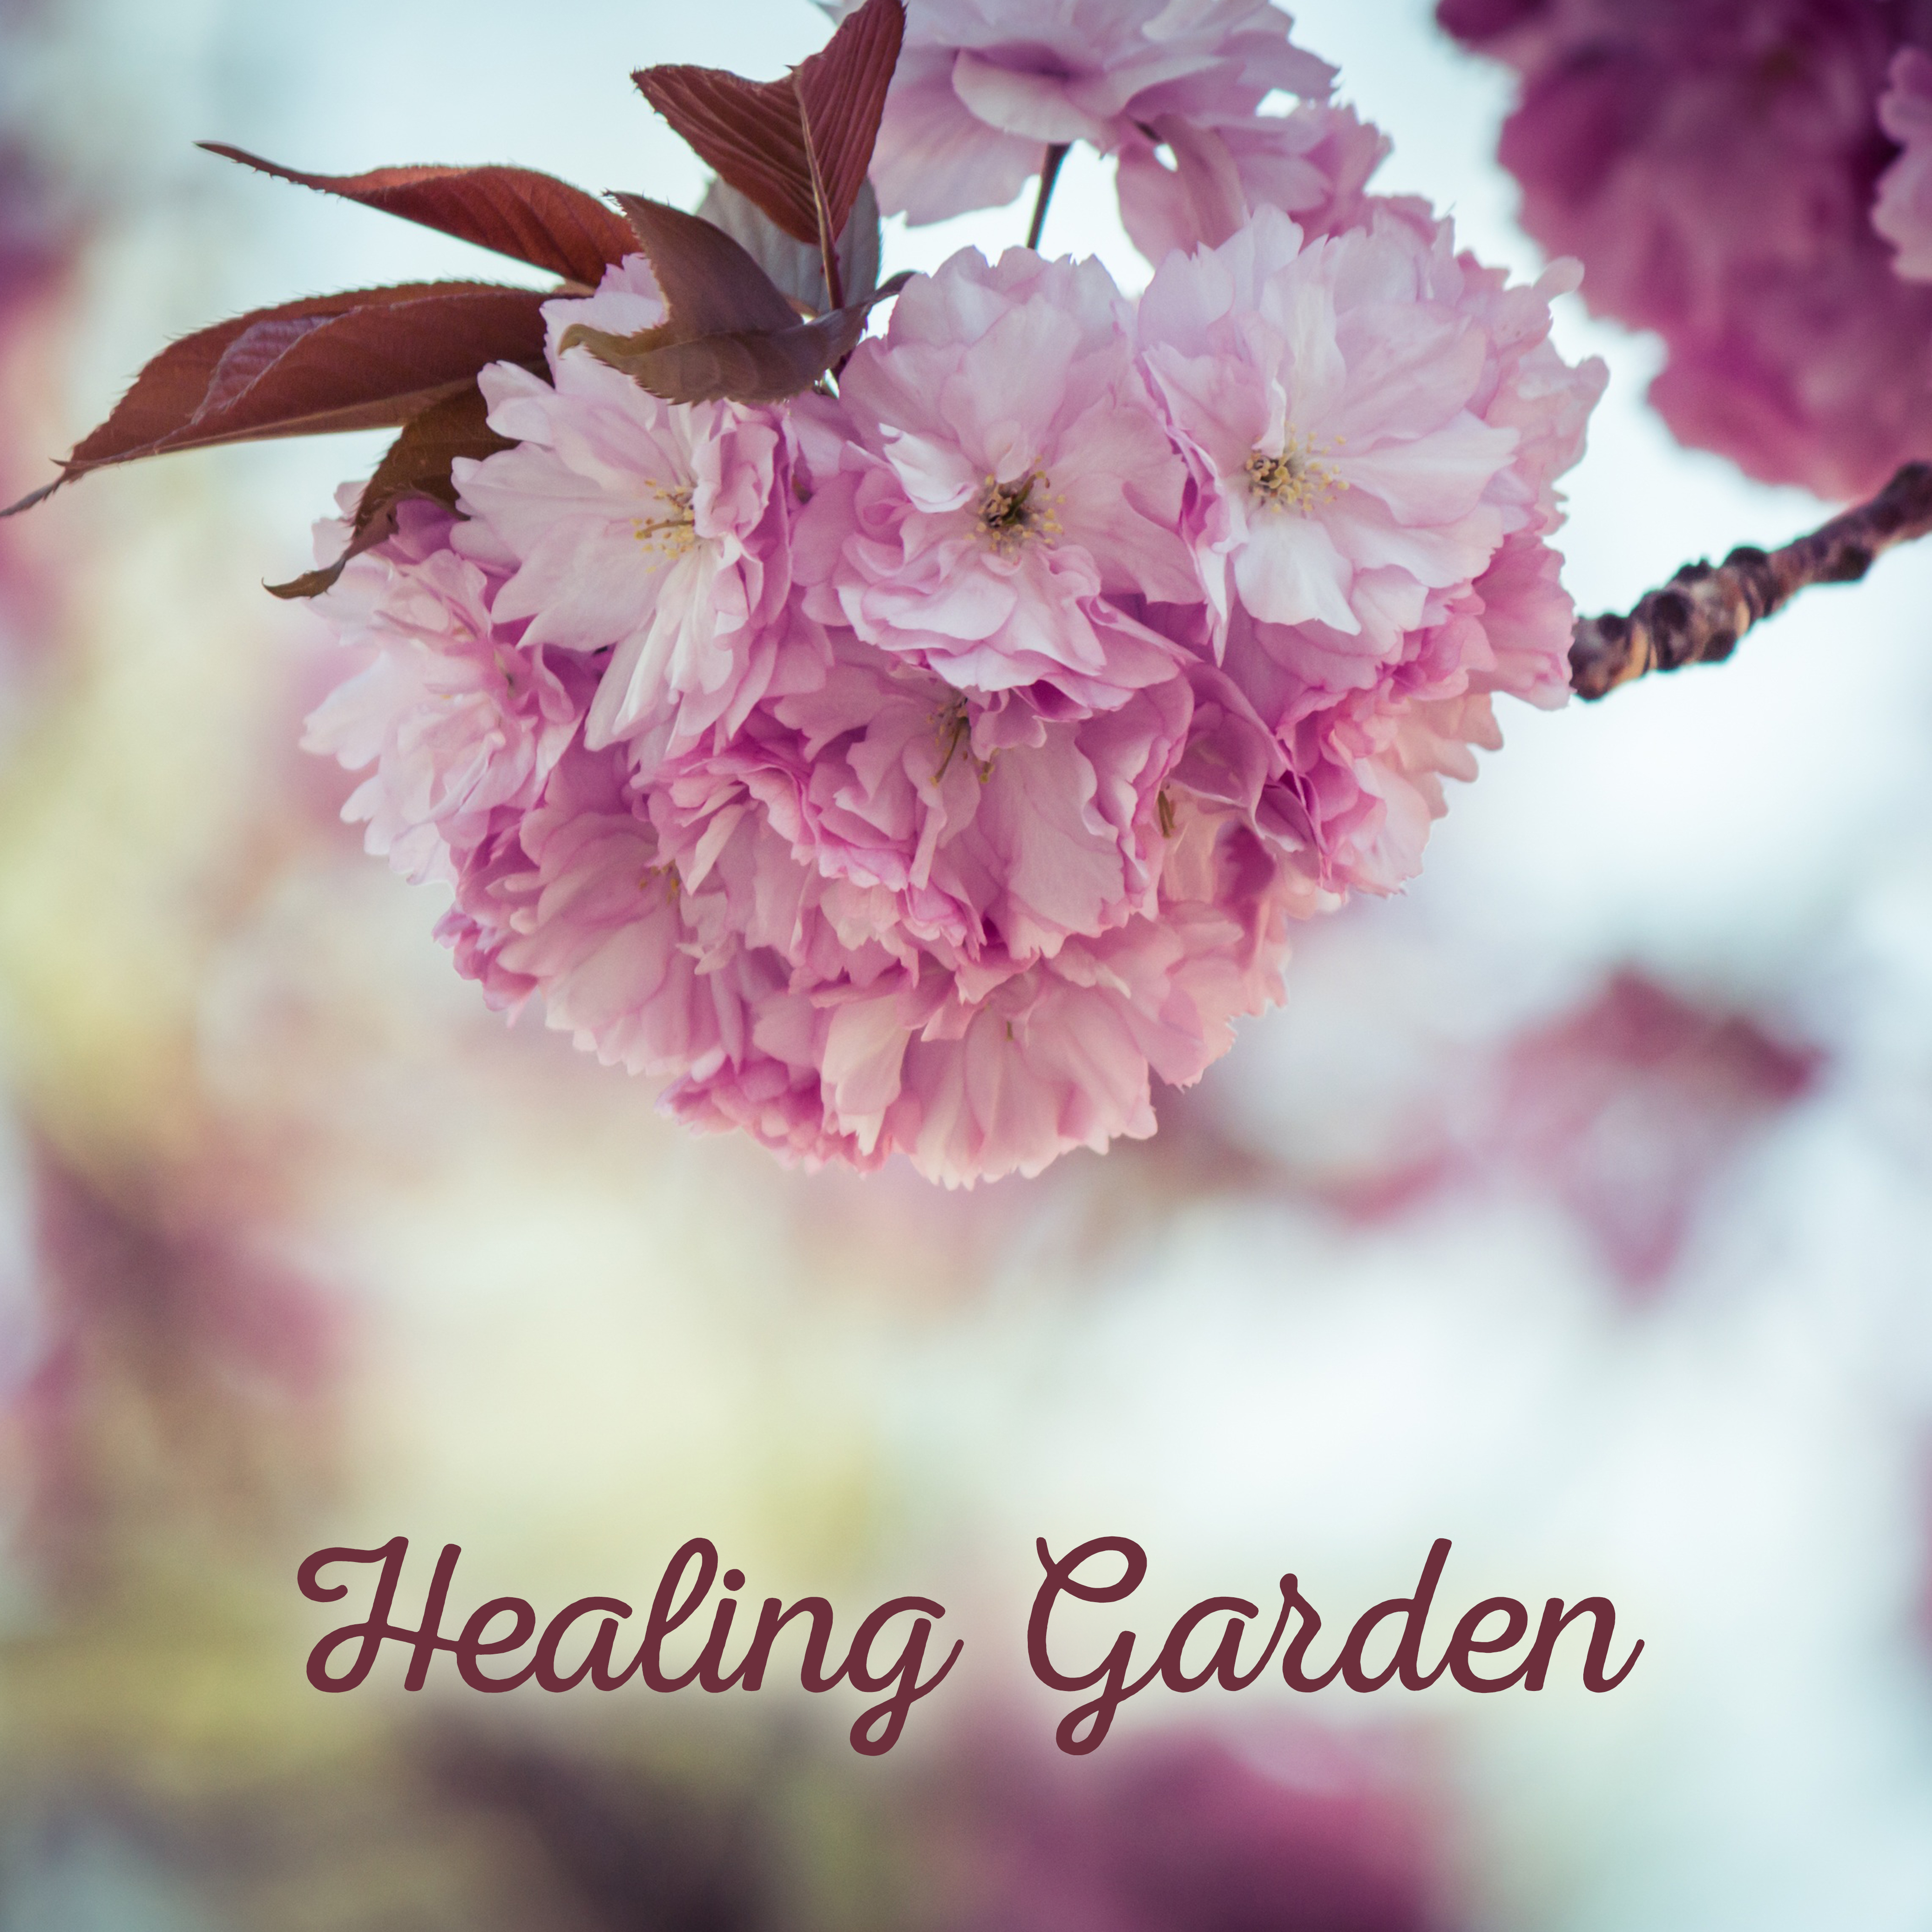 Healing Garden  Calming Relaxation Music for Massage, Rest, Peaceful New Age Sounds, Full of Nature, Falling Water, Birds Songs